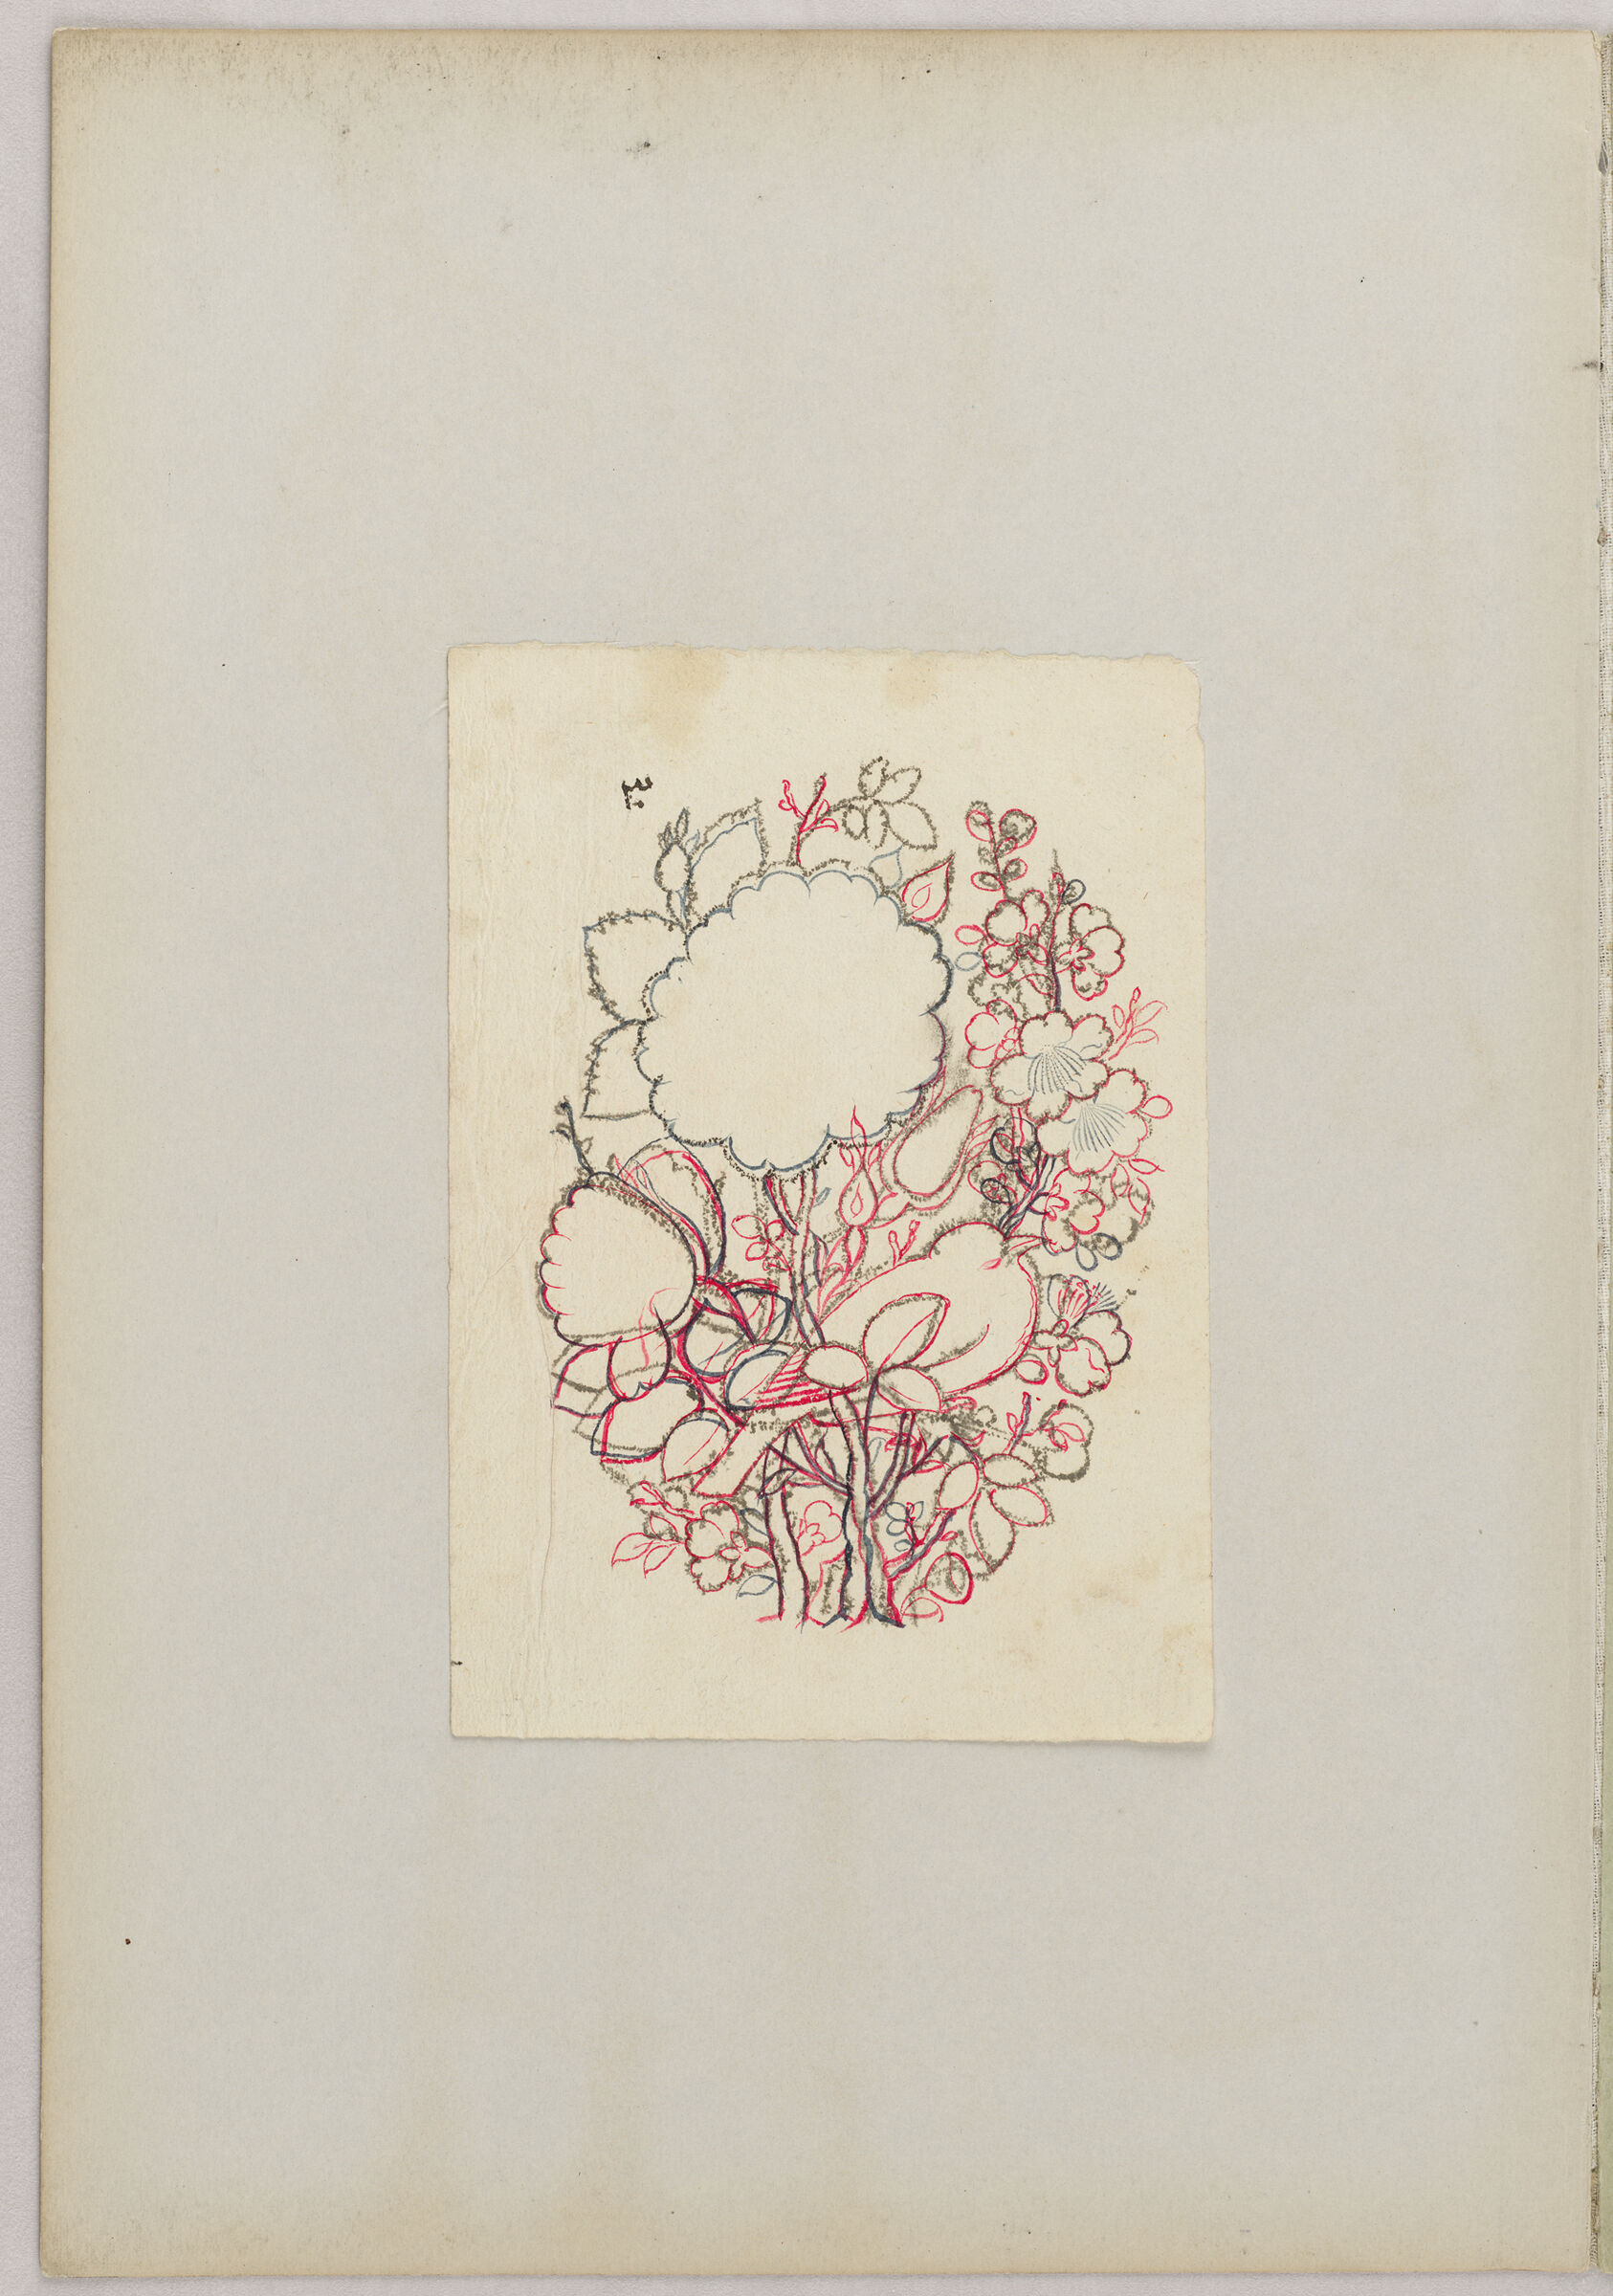 Folio 48 From An Album Of Drawings And Paintings: Bird And Flower Design (Recto); Blank Page (Verso)